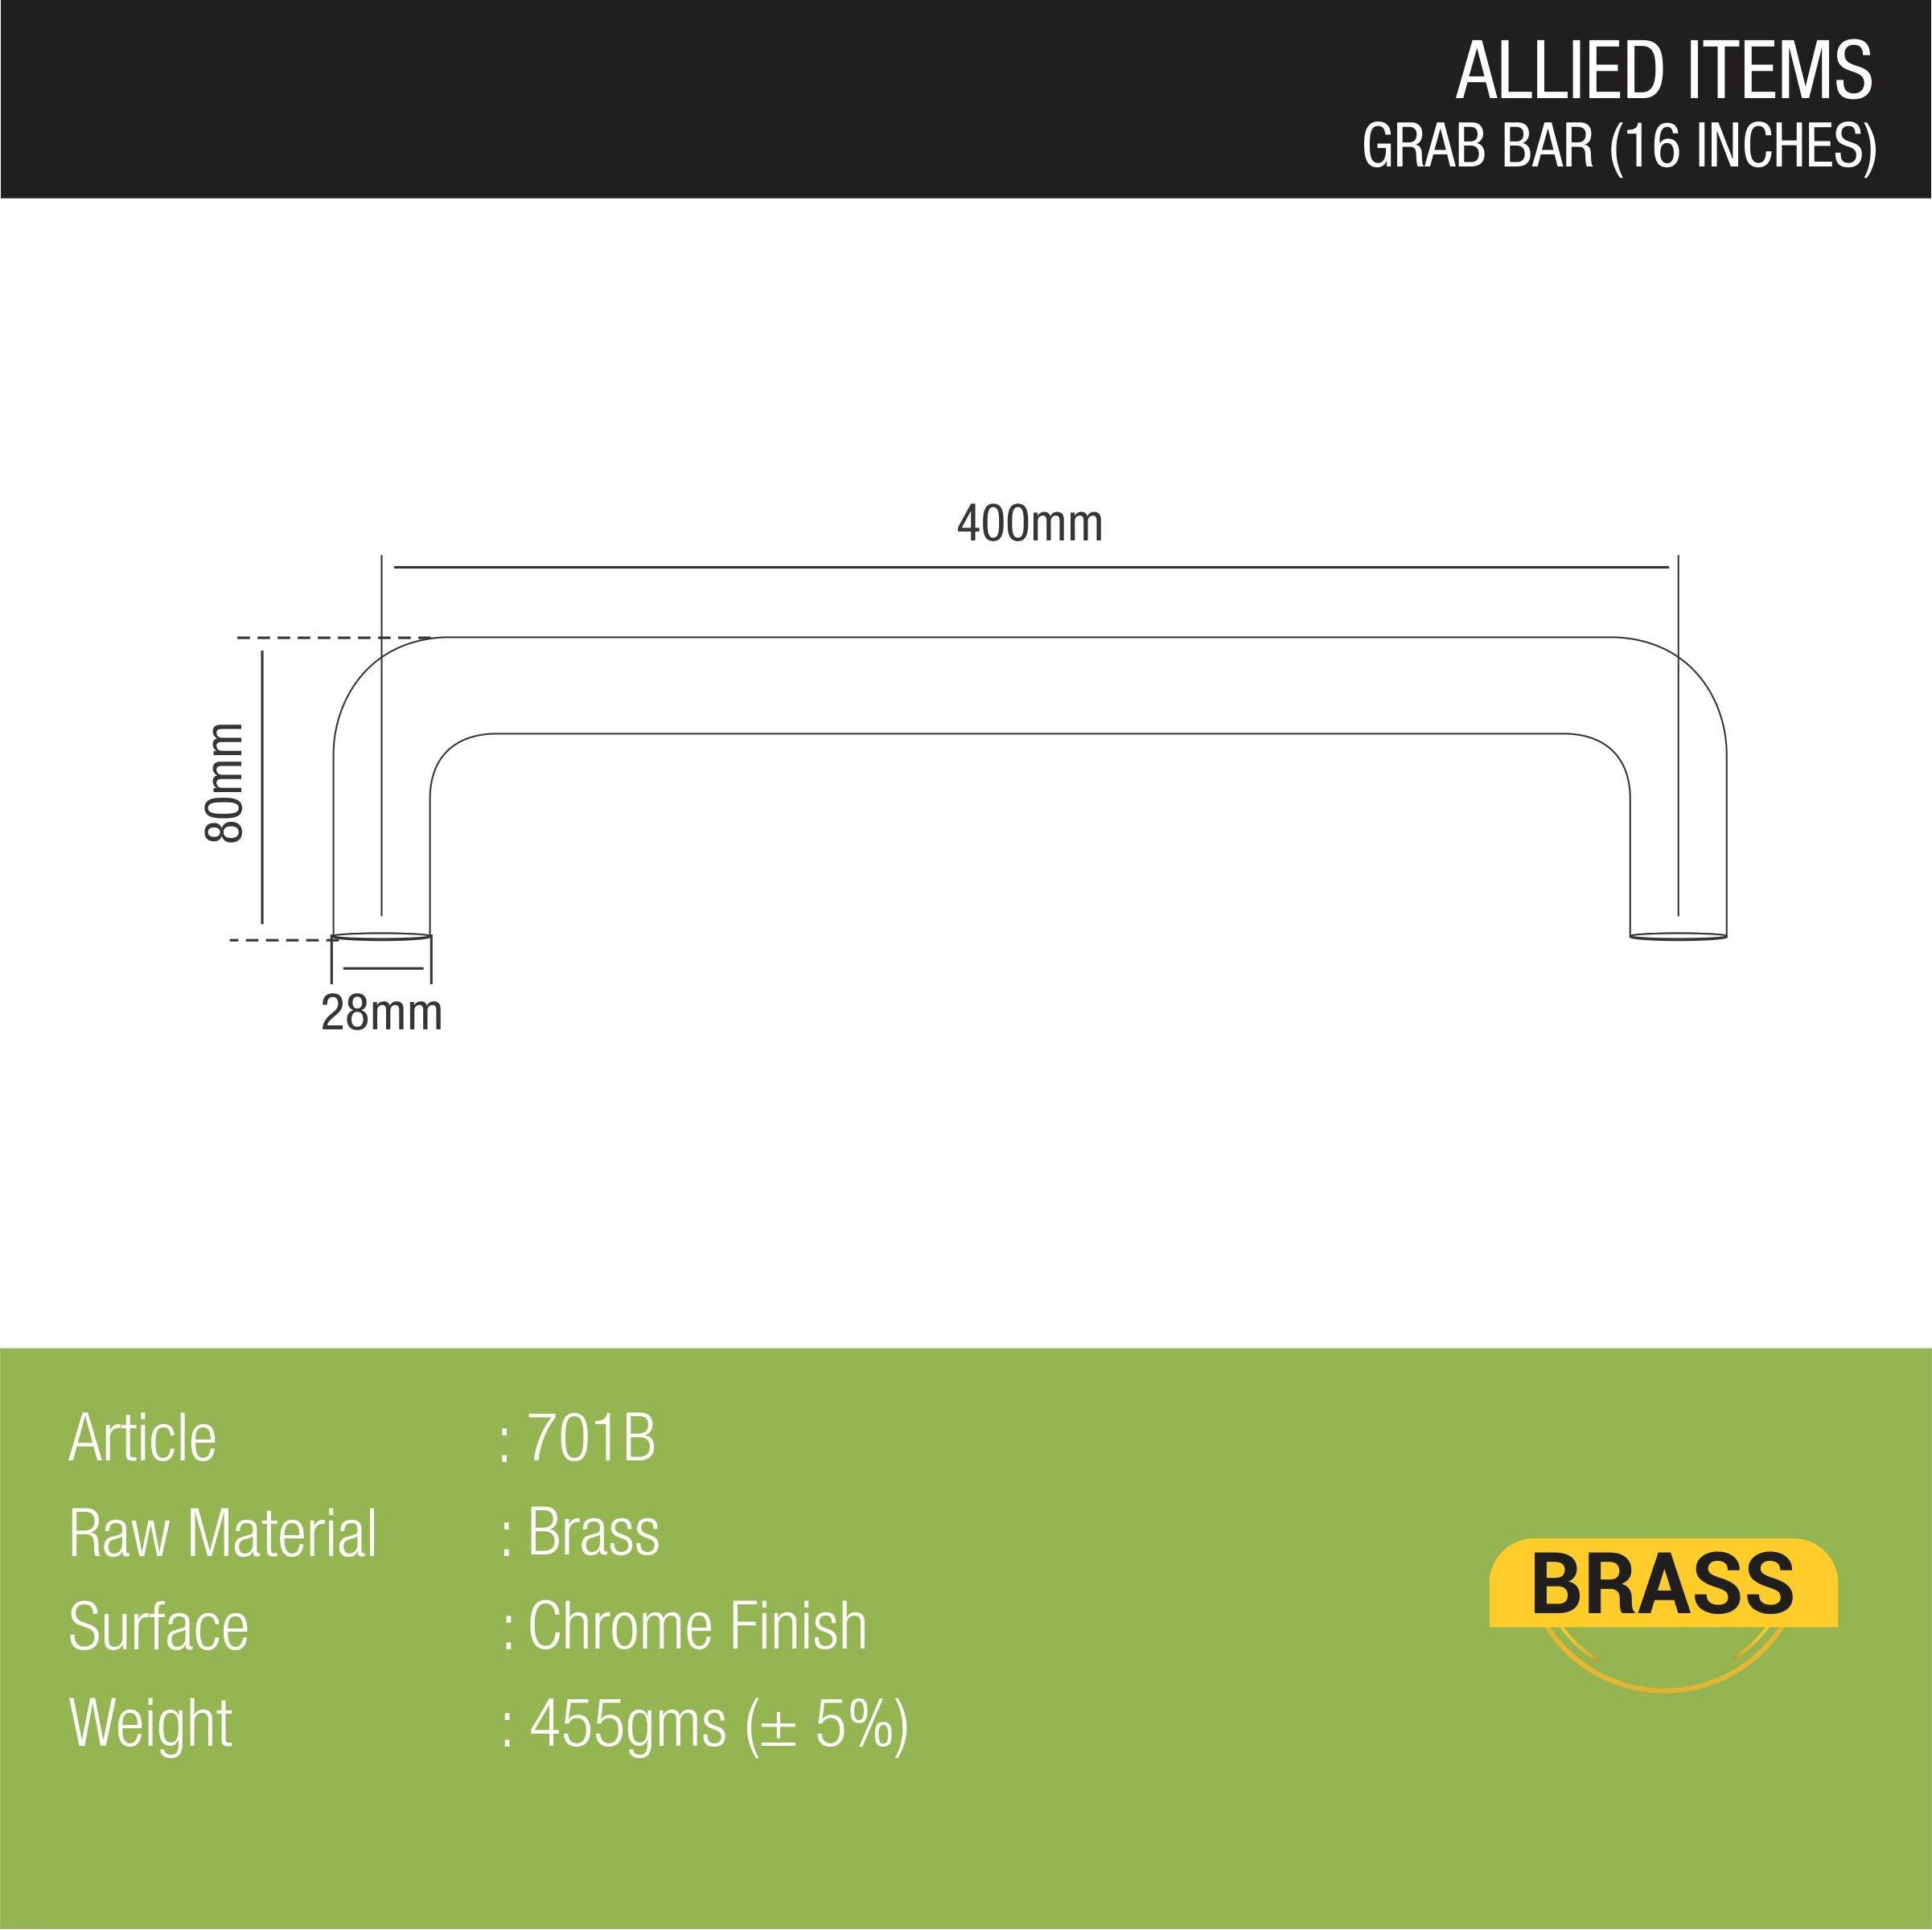 Brass Grab Bar (16 Inches) sizes and dimensions